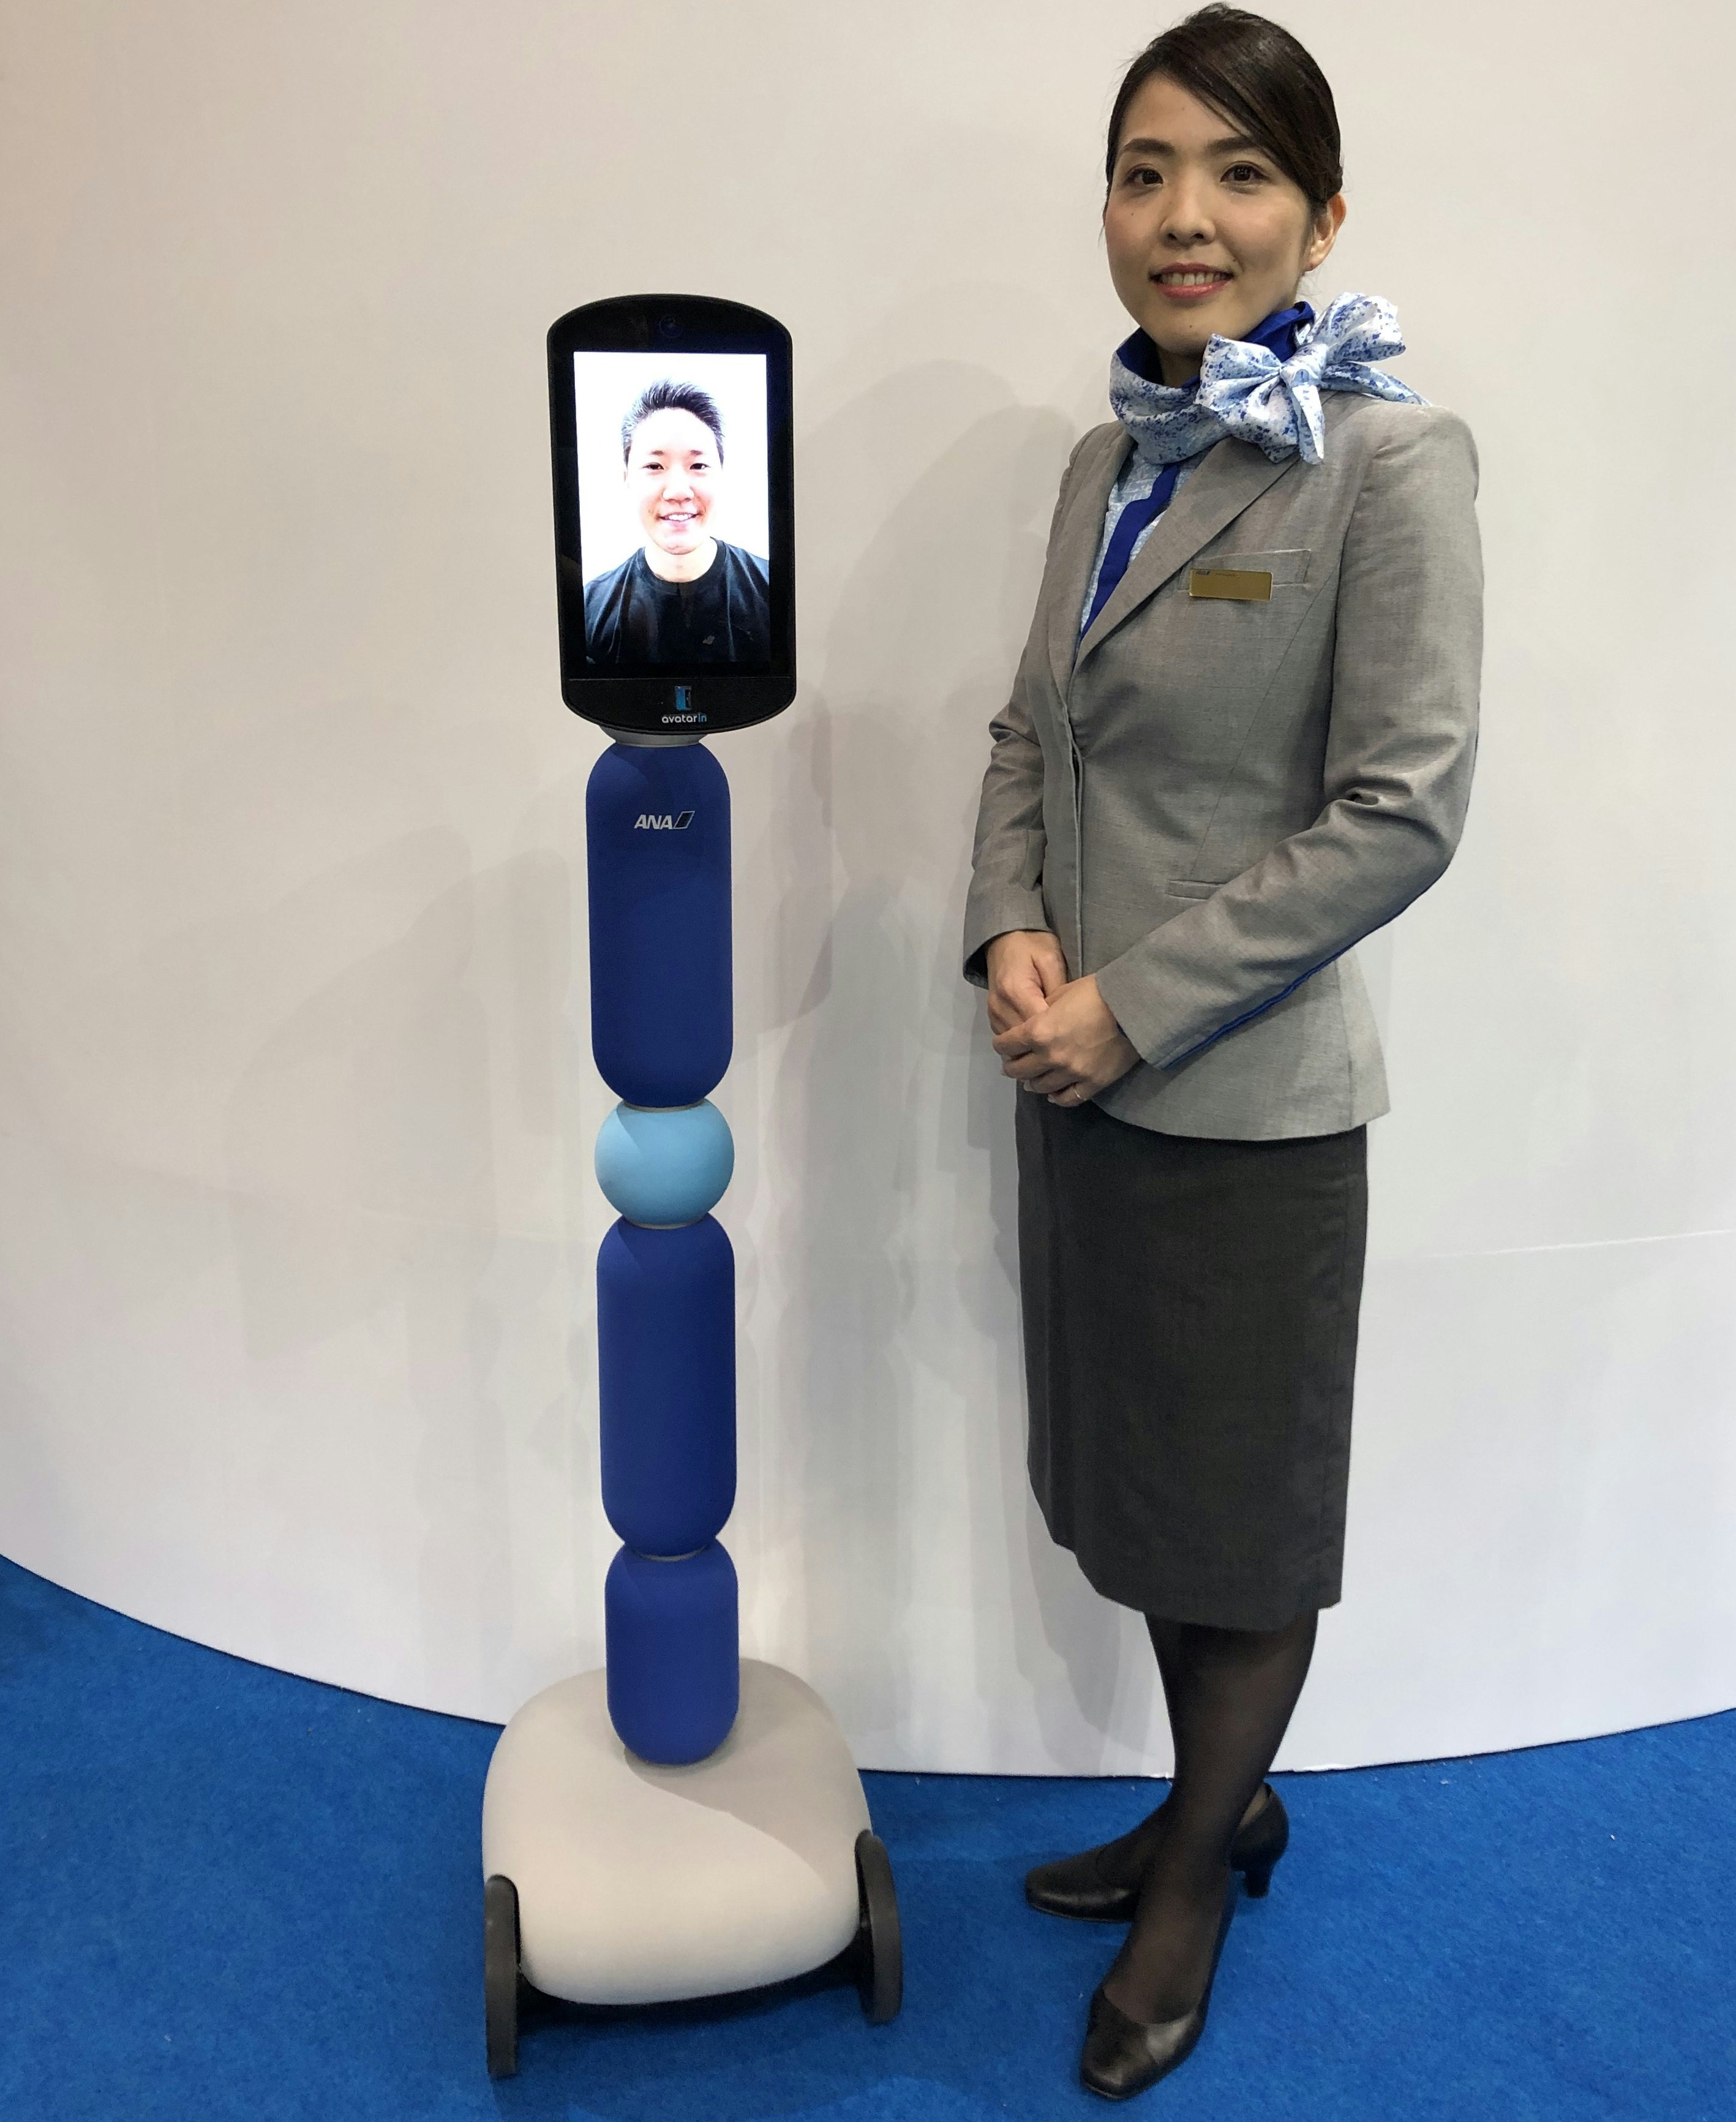 Newme, a telepresence robot that looks like a screen on wheels